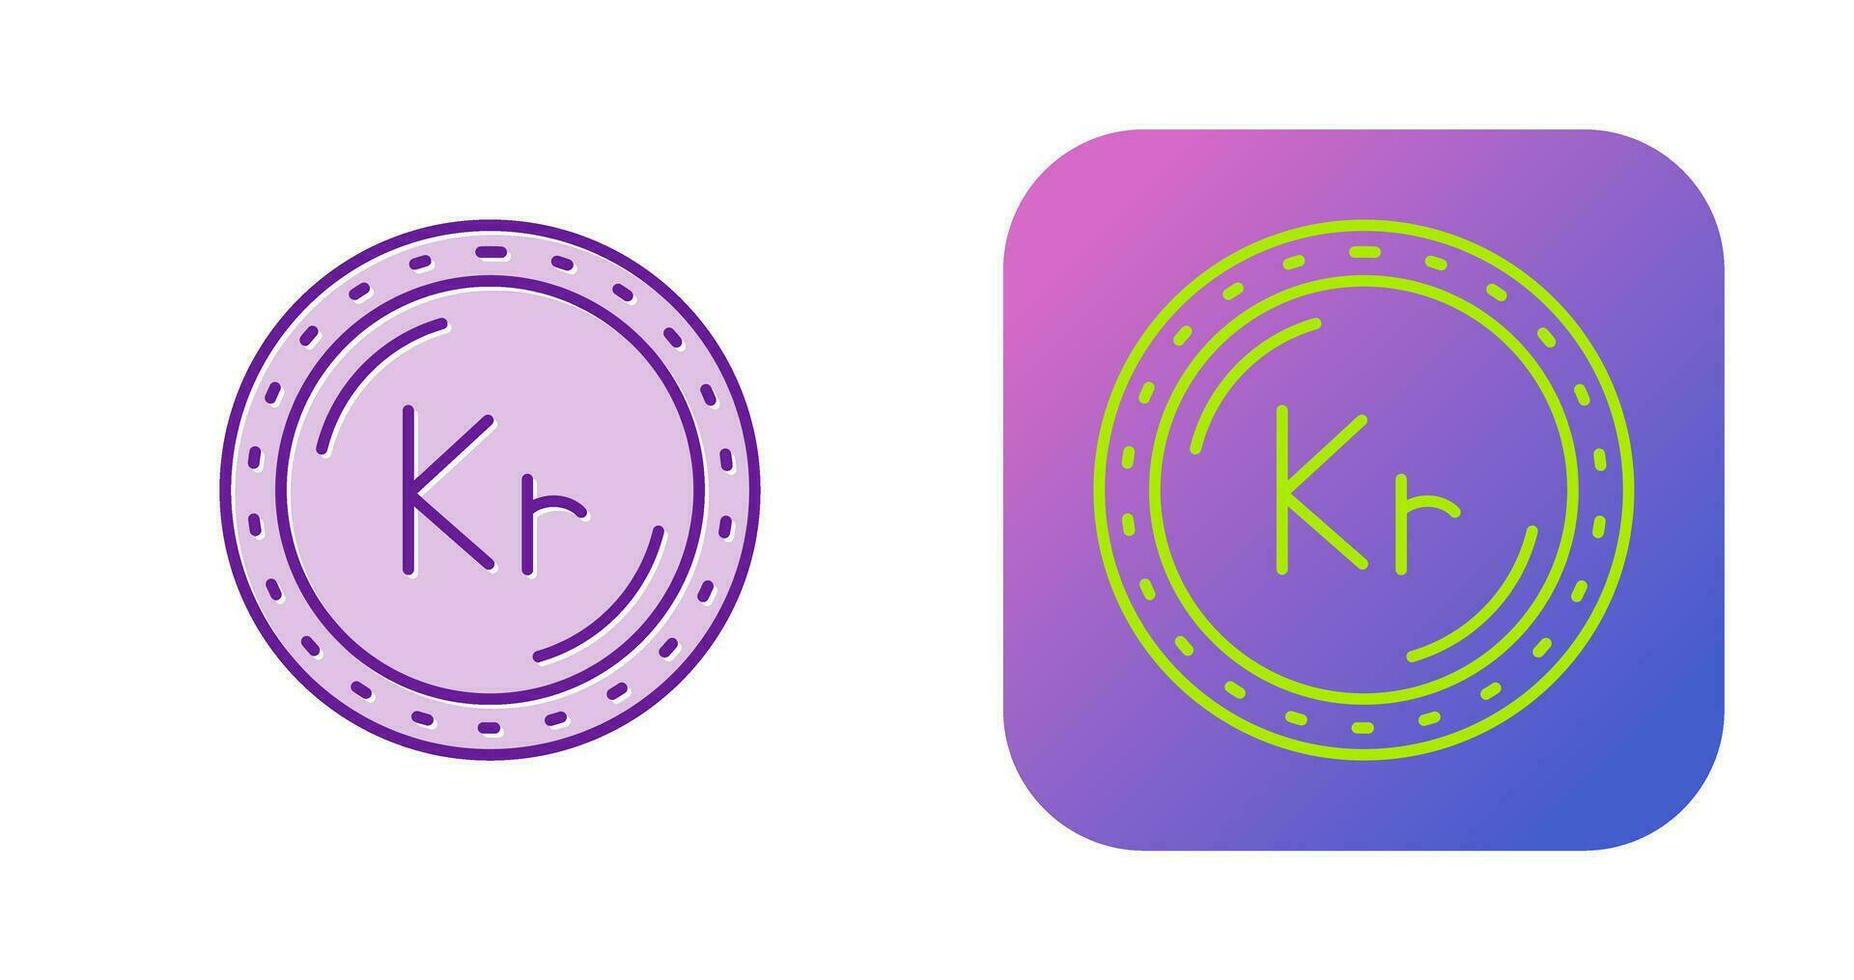 Krone Currency Vector Icon